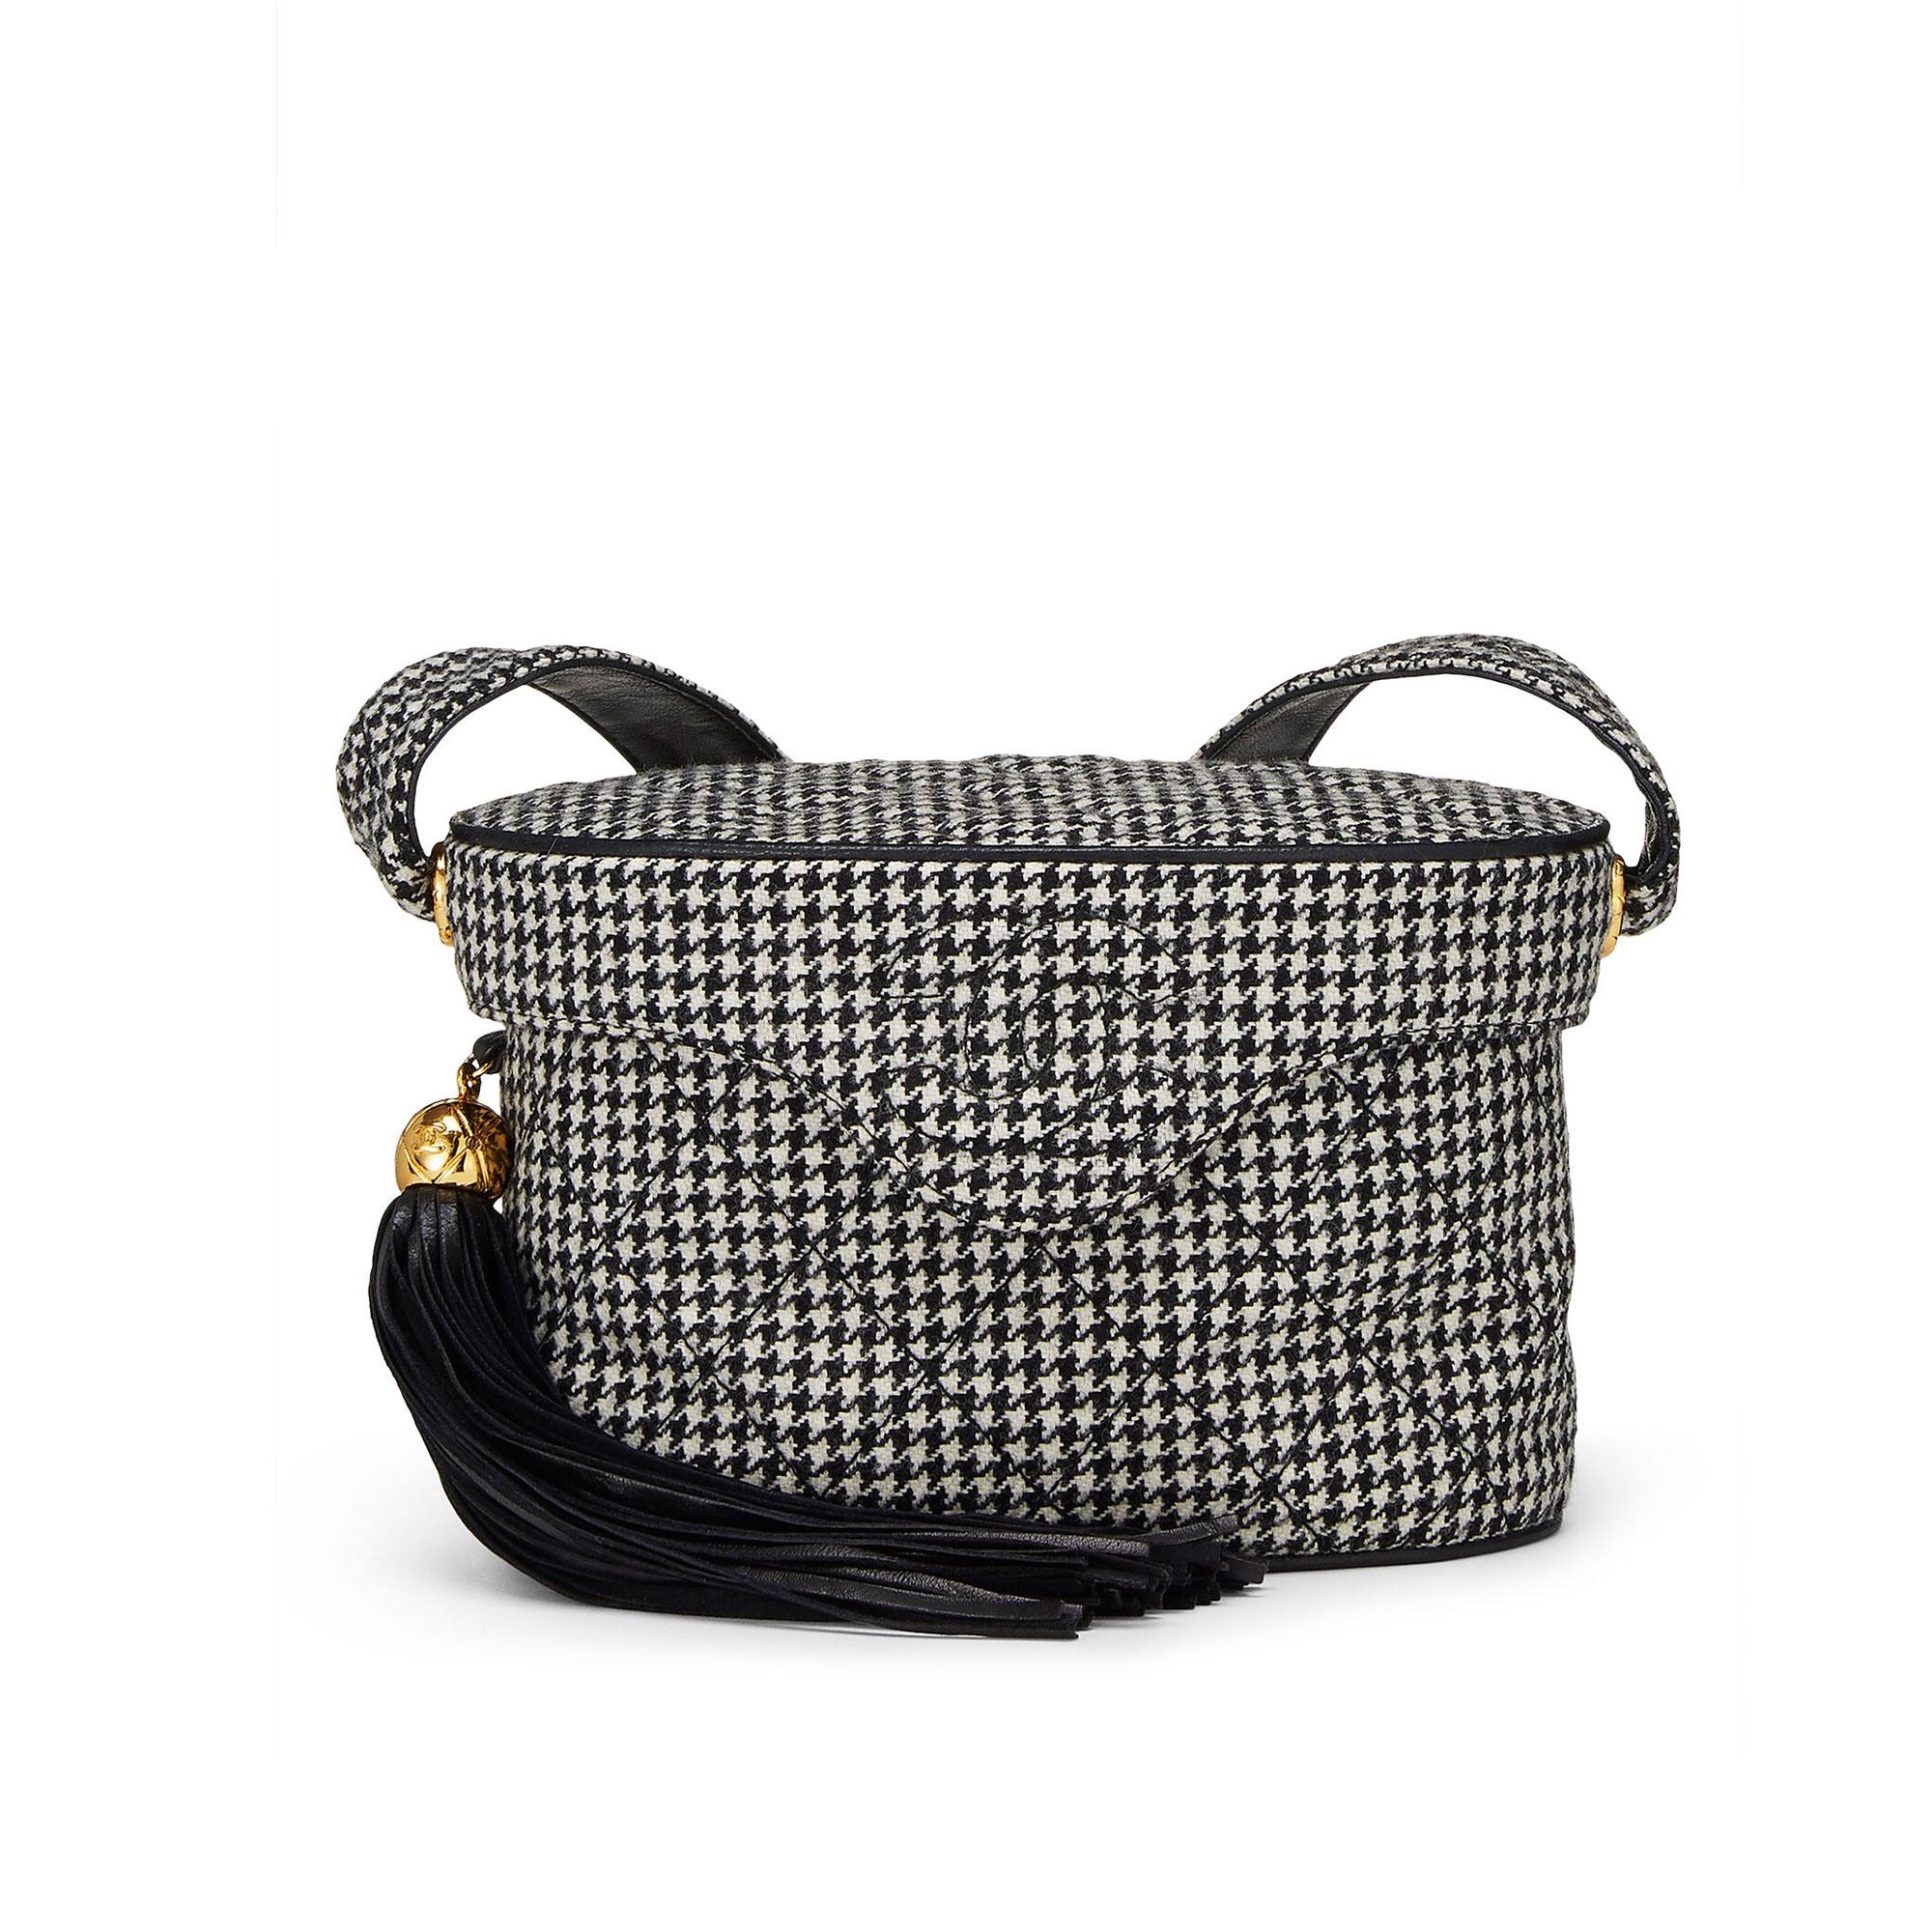 Chanel 1994 Binocular Case Rare Vintage Houndstooth Black White Crossbody Bag In Good Condition For Sale In Miami, FL